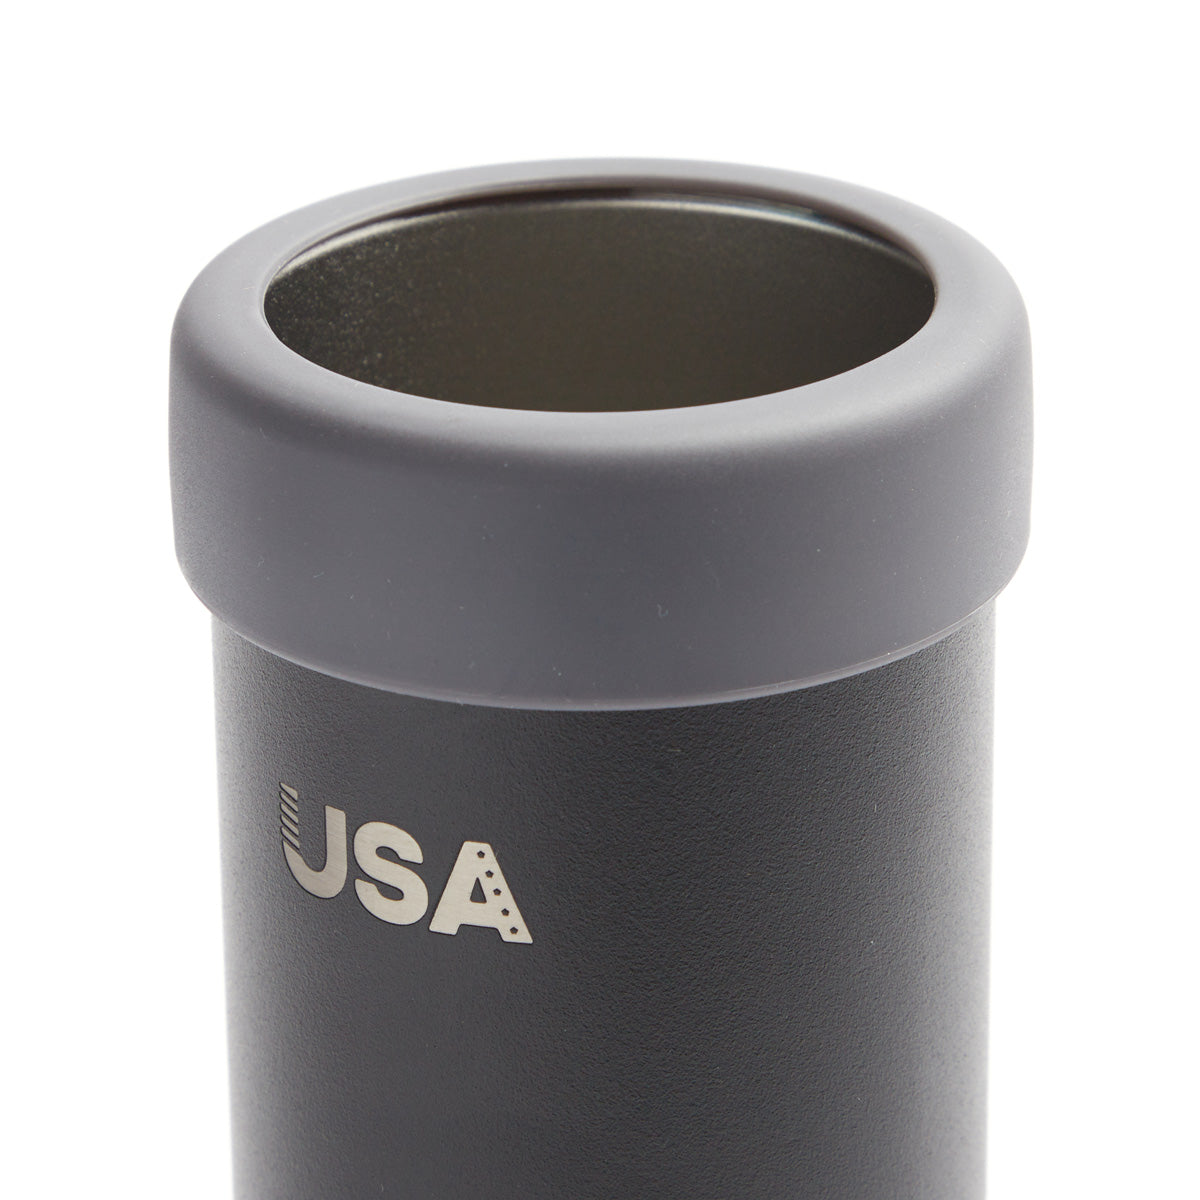 Hydro Flask 12 oz Slim Cooler Cup - Landsharks Outfitters